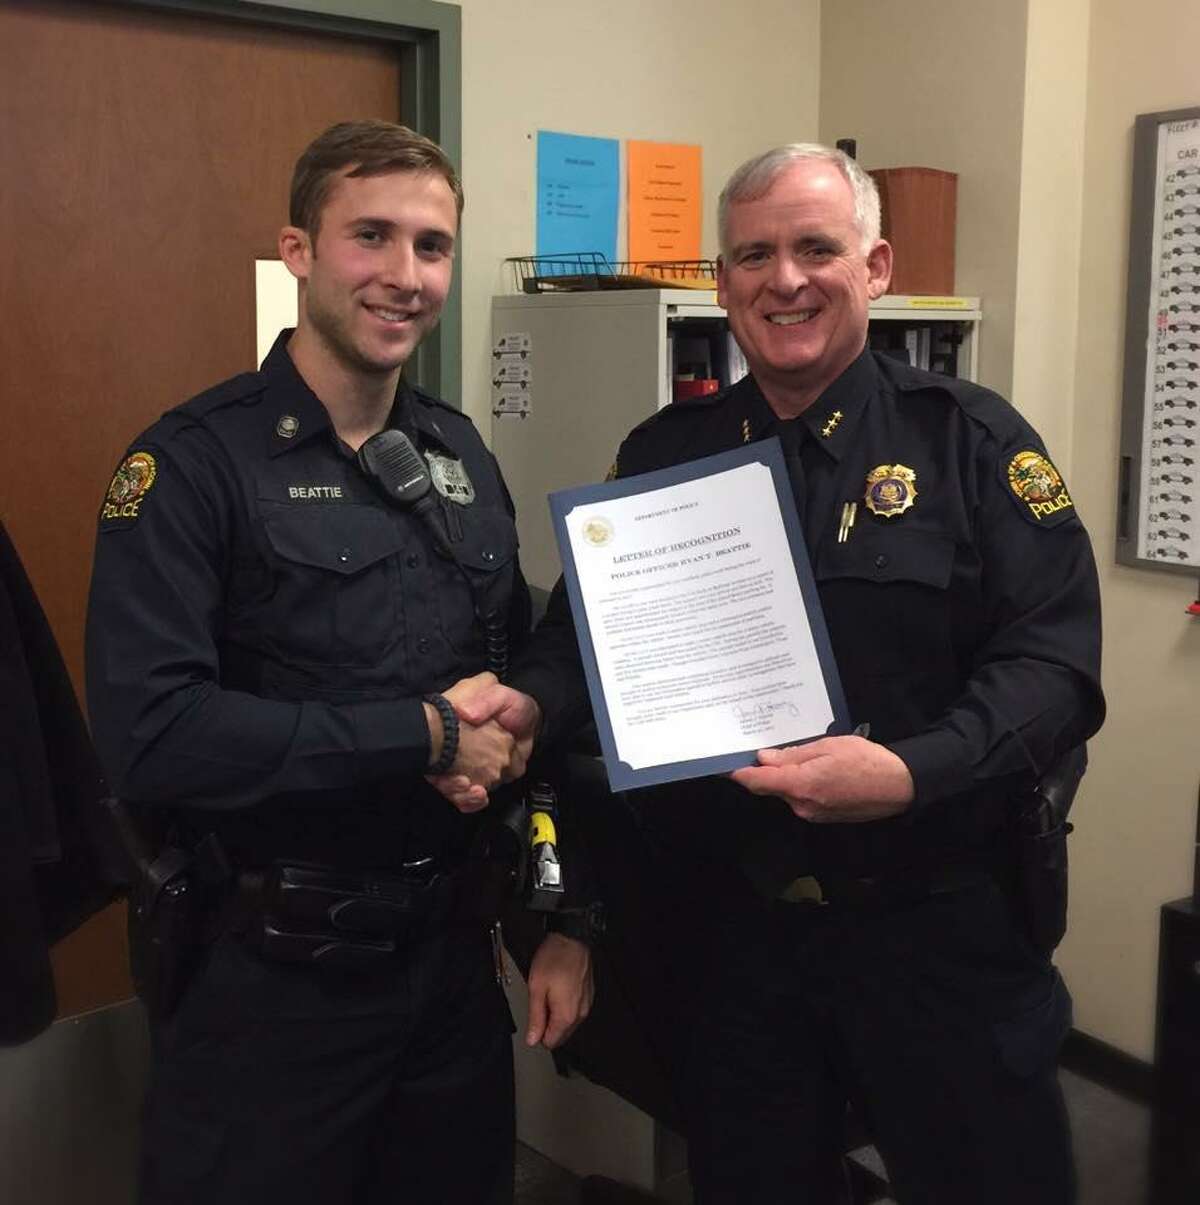 Greenwich Police Officer Ryan Beattie, left, is congratulated by Police Chief James Heavey for garnering “Officer of the Month” honors.